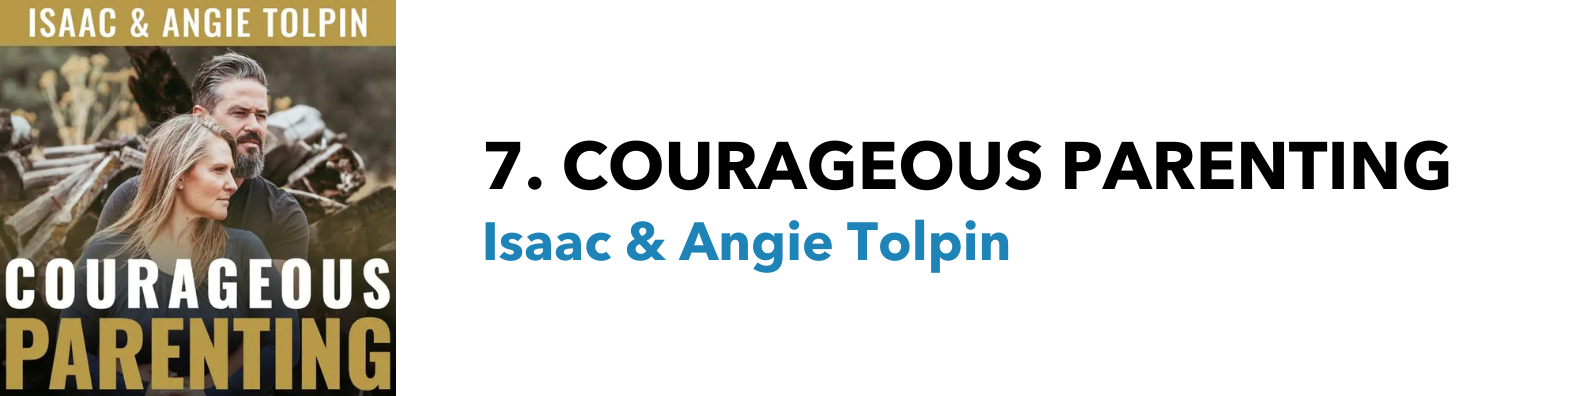 <a href="https://podcasts.apple.com/us/podcast/courageous-parenting/id1447714806">Listen on Apple Podcasts</a>